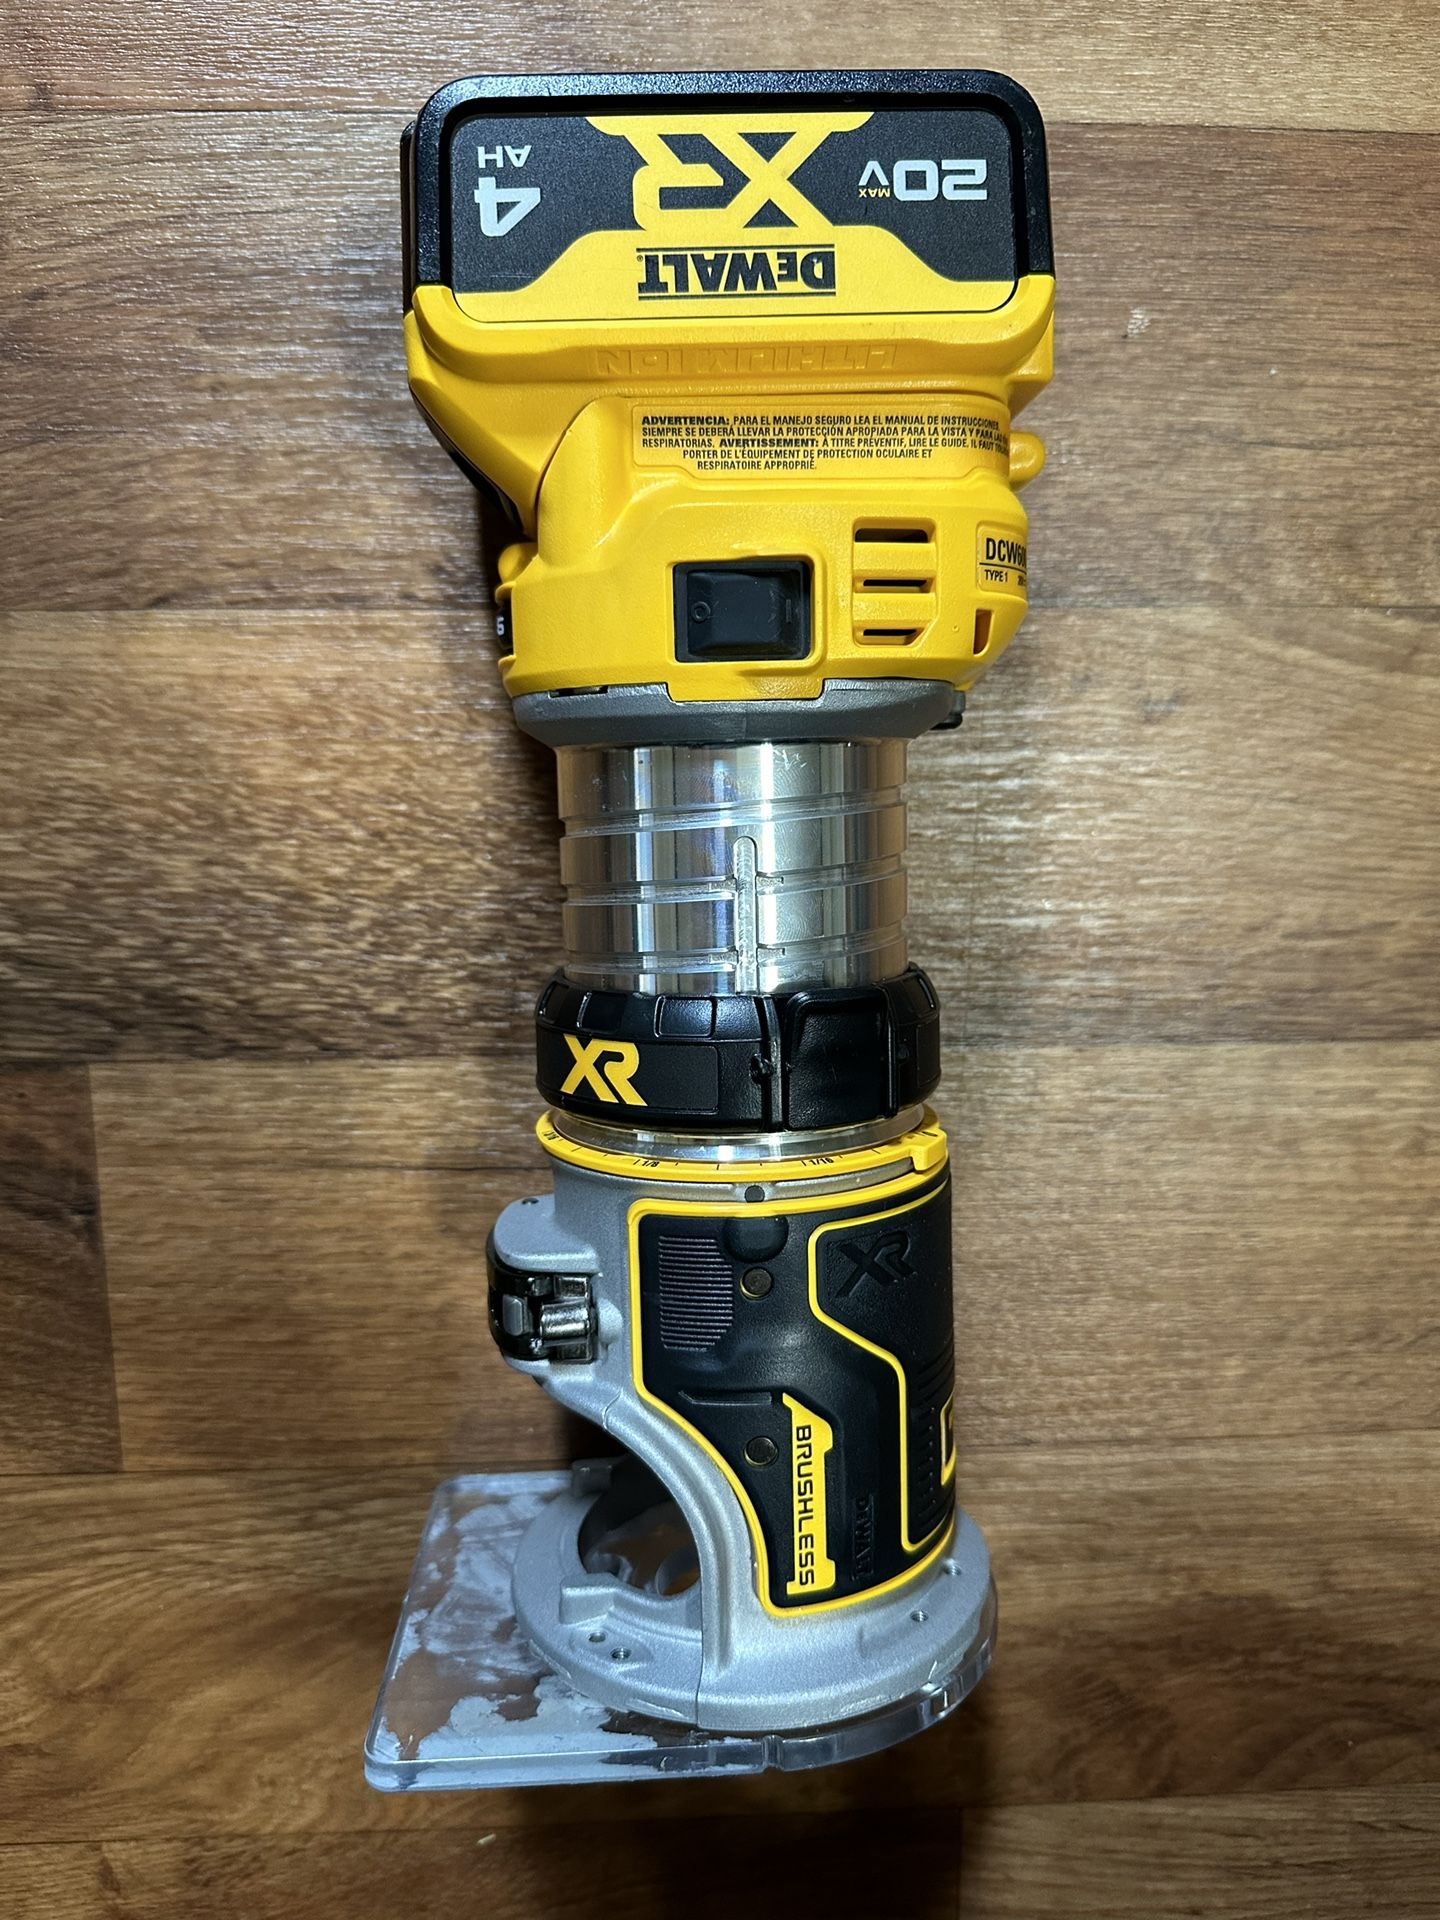 Dewalt 20v Router With Battery Like New!